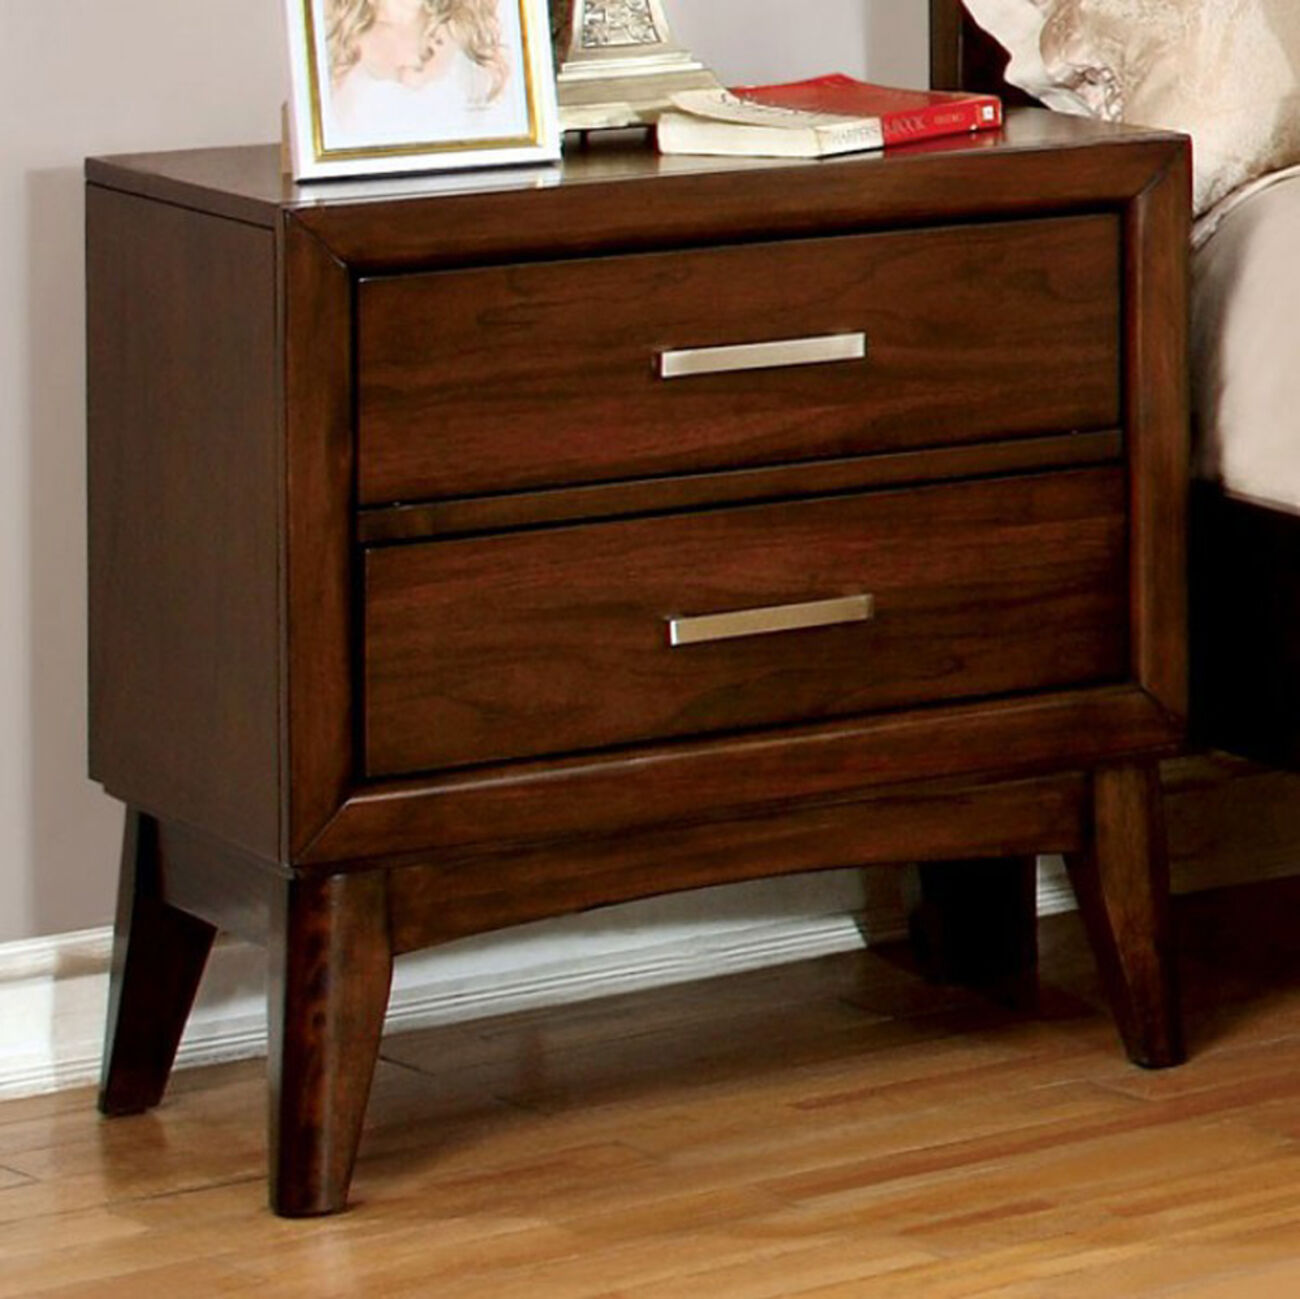 Snyder Transitional Nightstand, Brown Cherry Finish